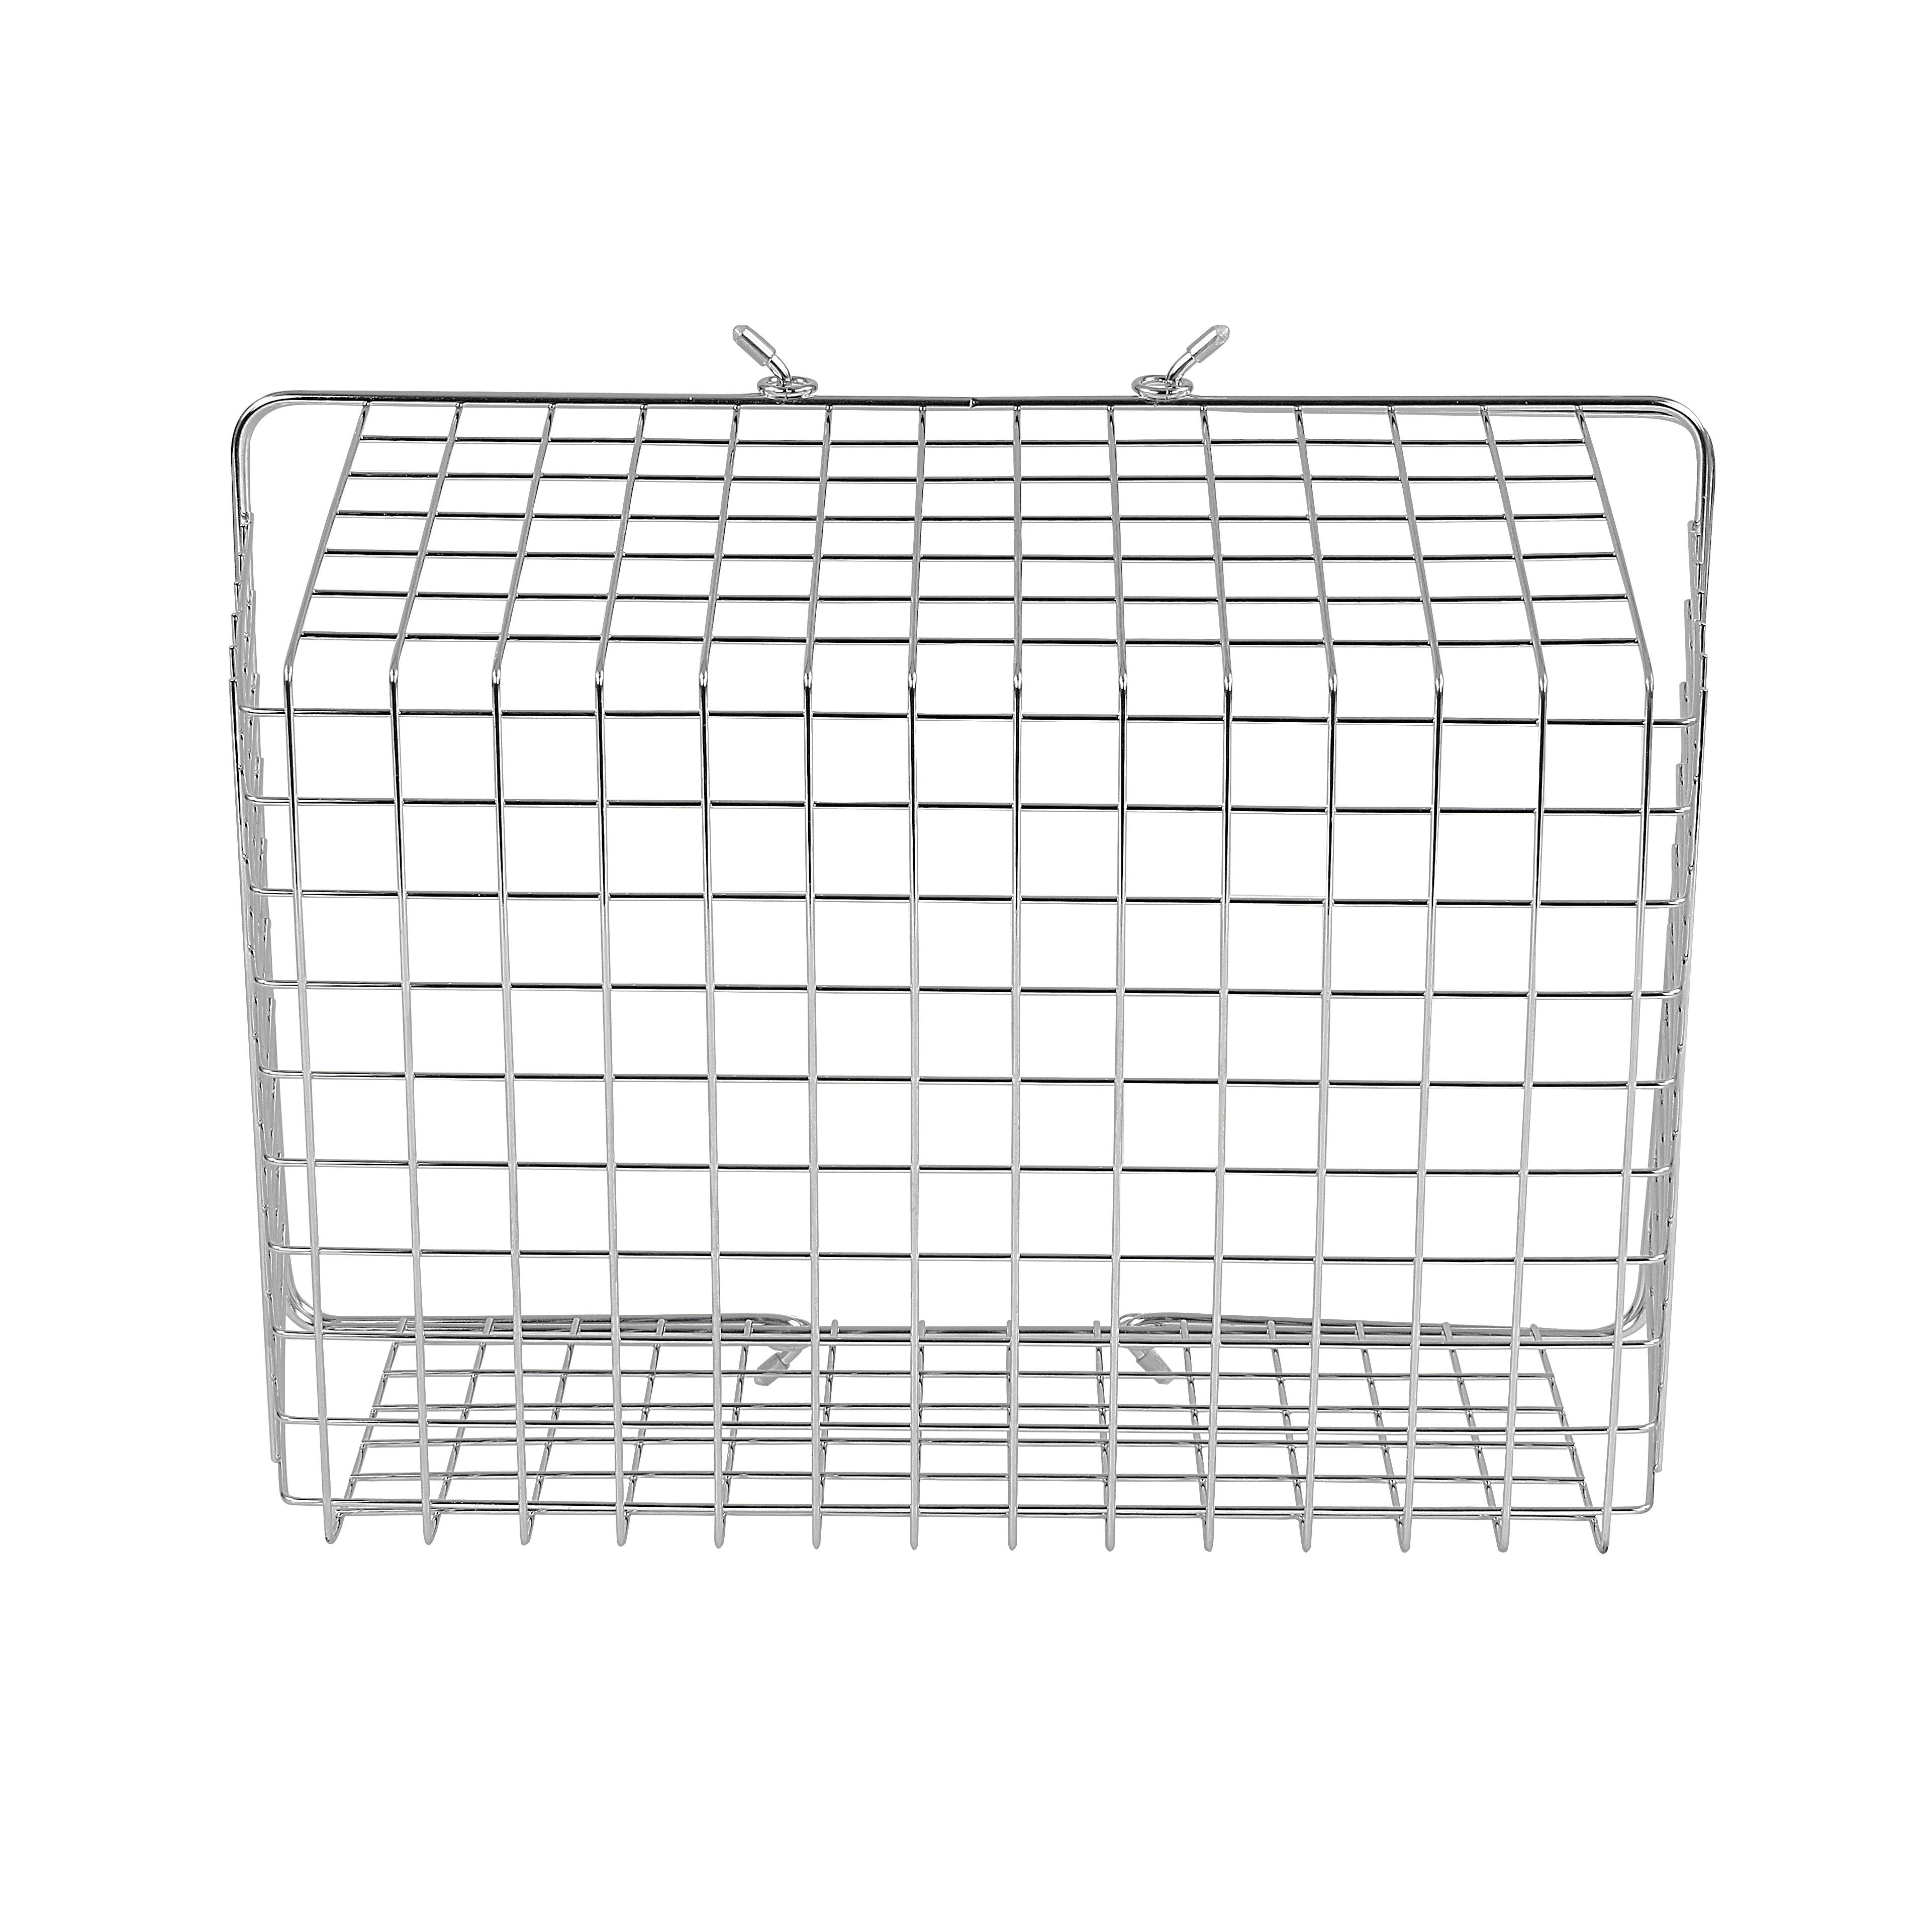 Spectrum Diversified Steel Wire Storage Basket with Handles for Pantry, Countertop and More, Large, Chrome - image 4 of 13